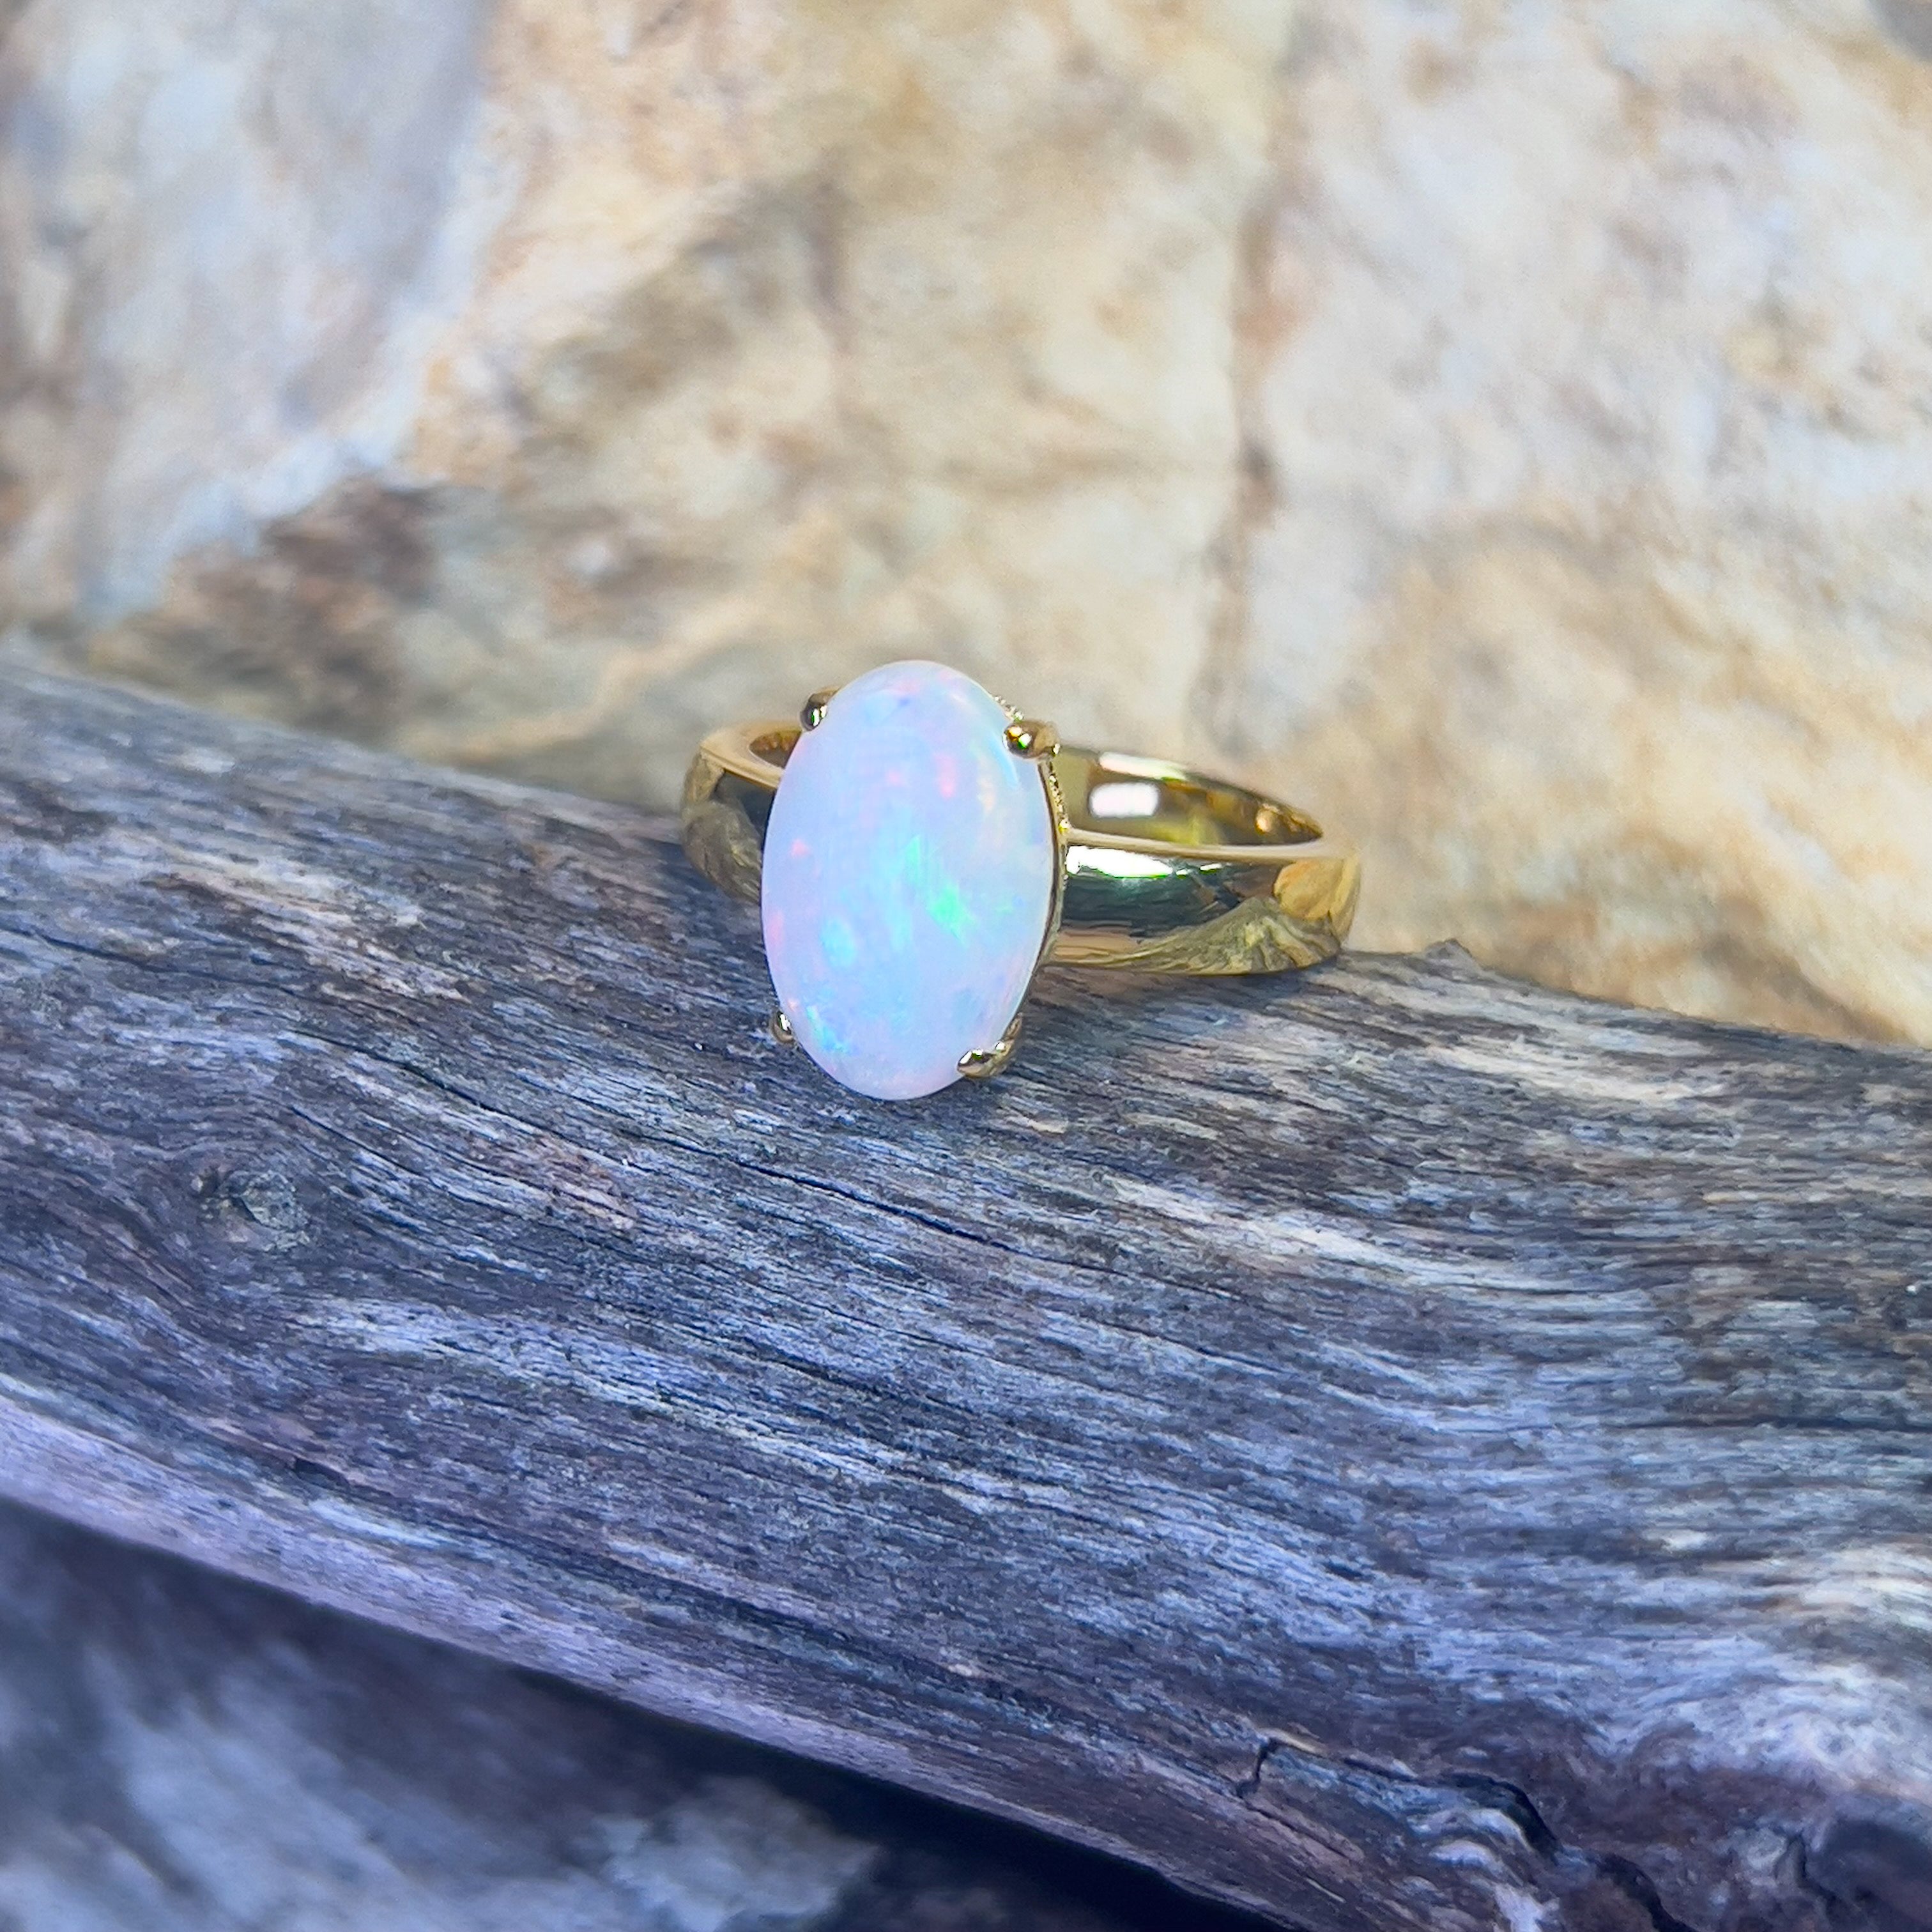 Gold Plated Sterling Silver solitaire White Opal ring 1.1ct - Masterpiece Jewellery Opal & Gems Sydney Australia | Online Shop